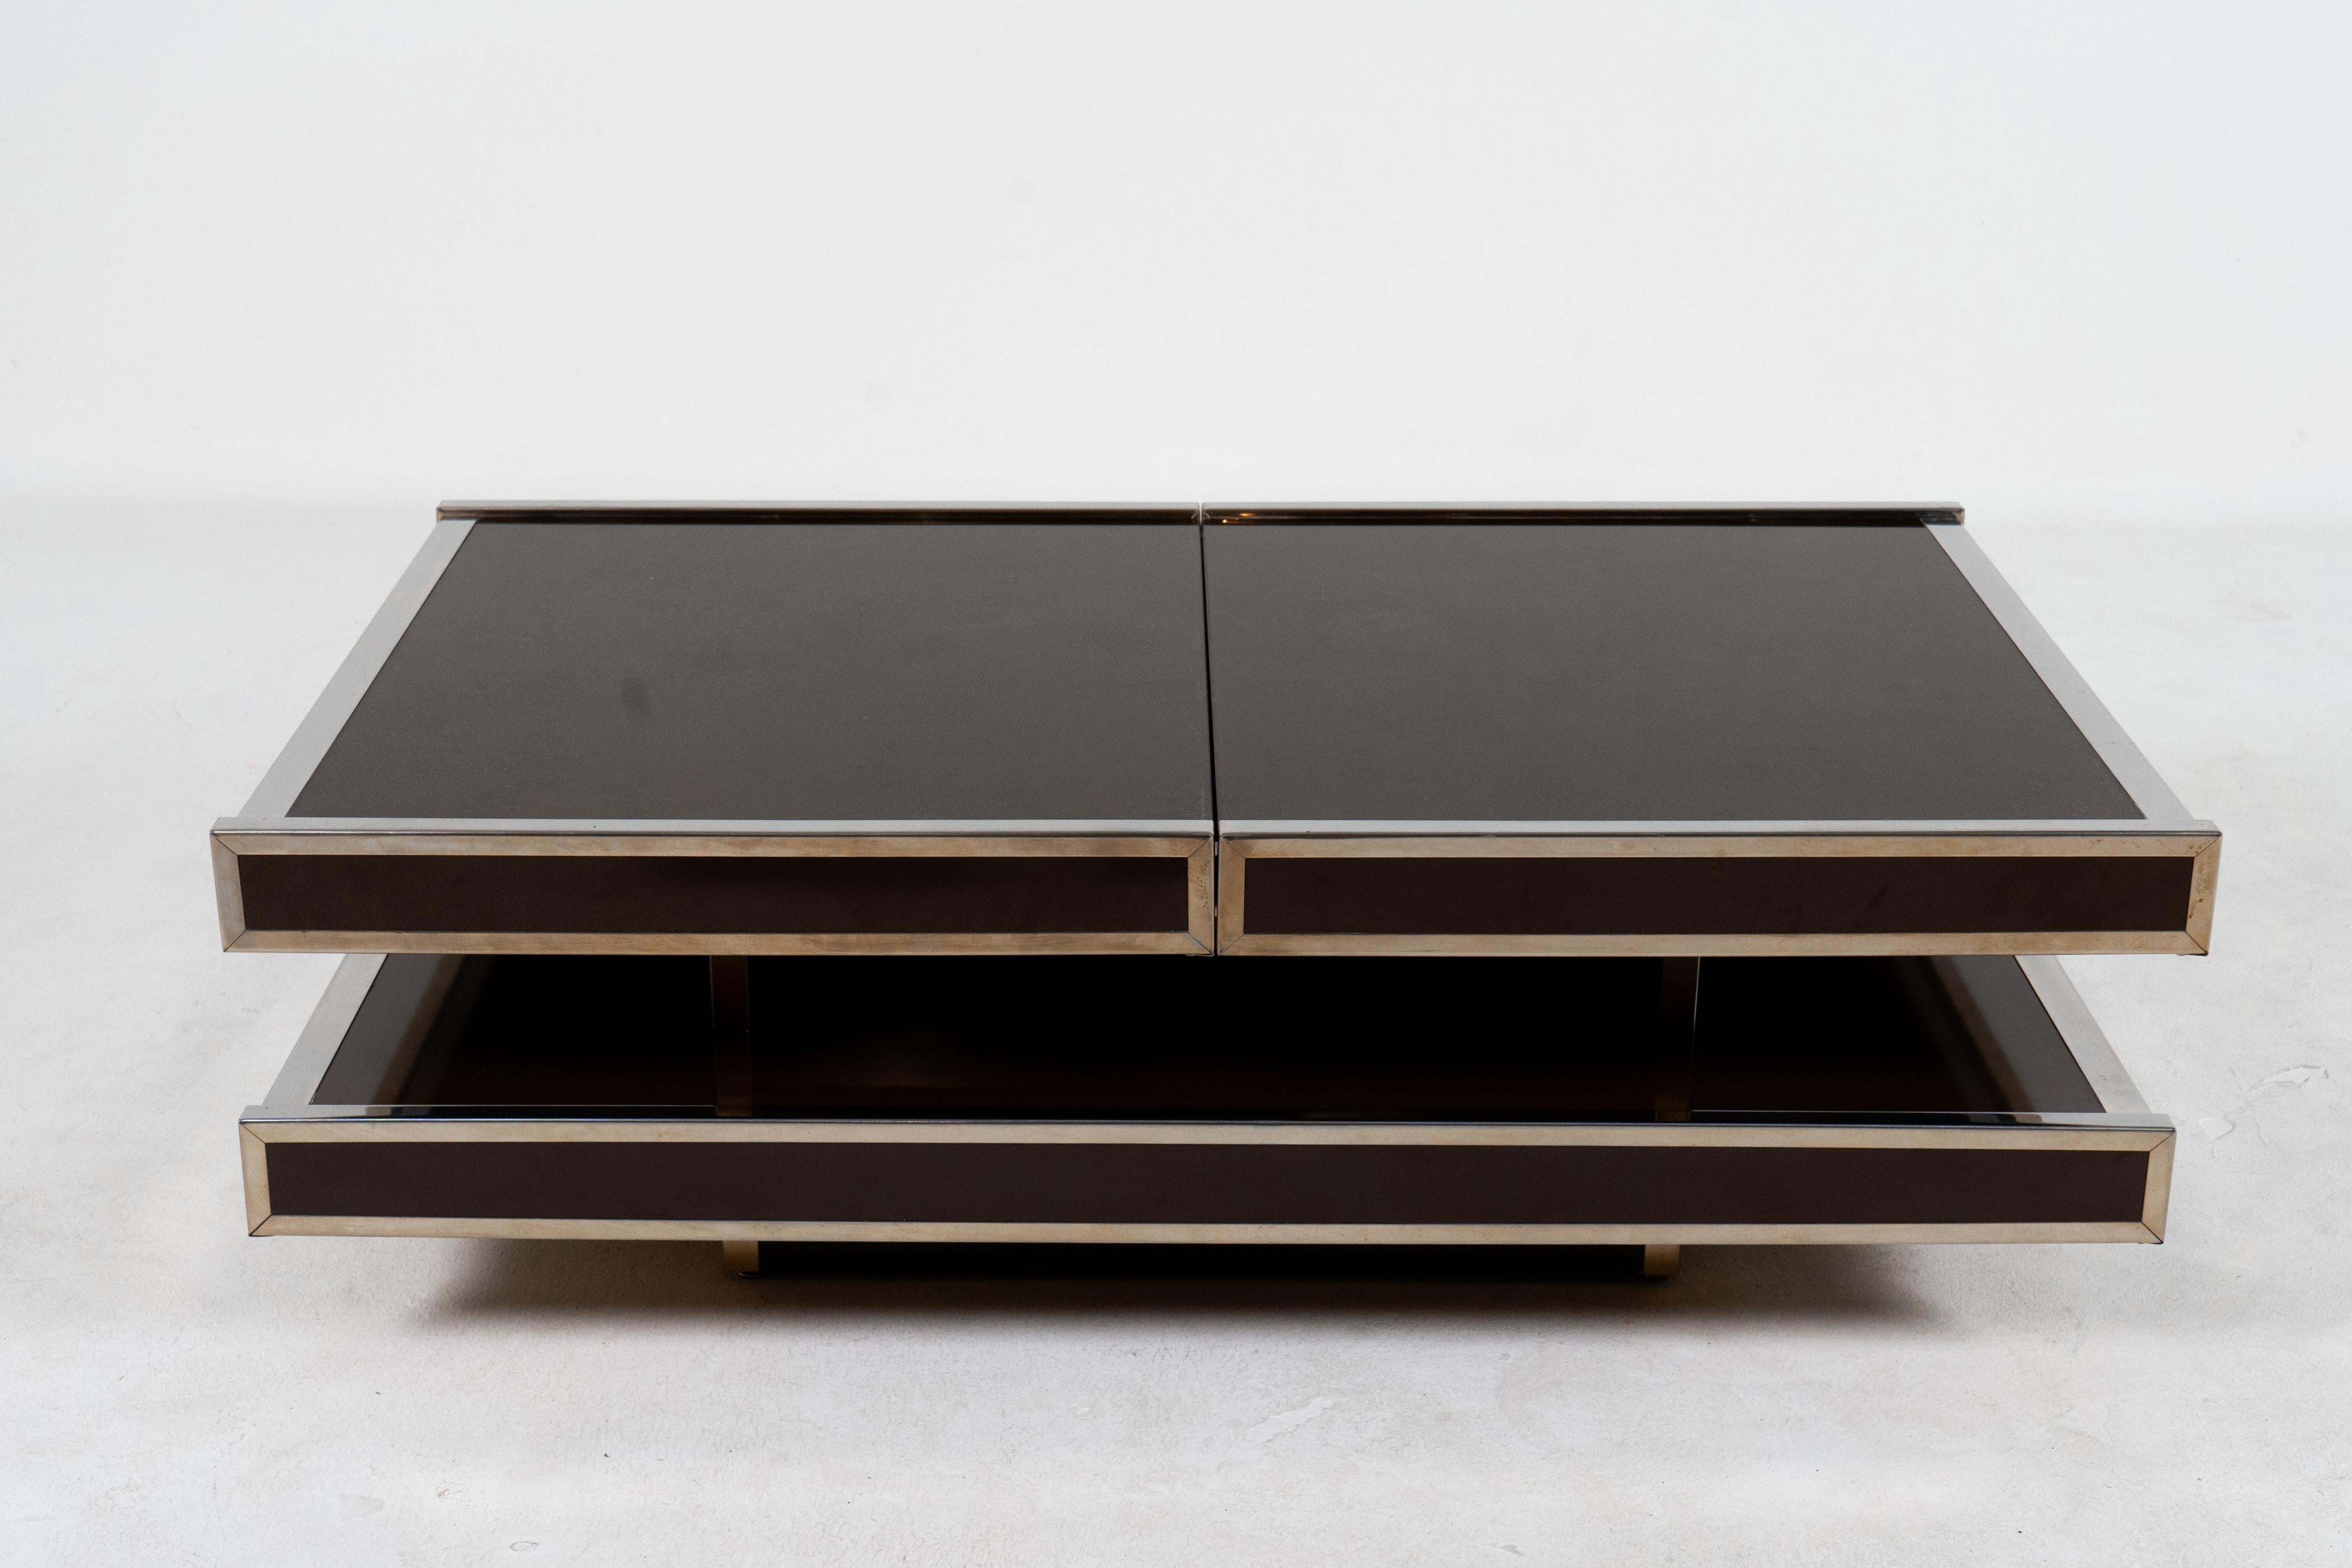 A sophisticated Italian Midcentury Modern cocktail table and dry bar by Willy Rizzo. The table captures the glamour of 1970's design with its low, sleek, polished aesthetic. Furthermore, it is highly functional as it expands to accommodate a large